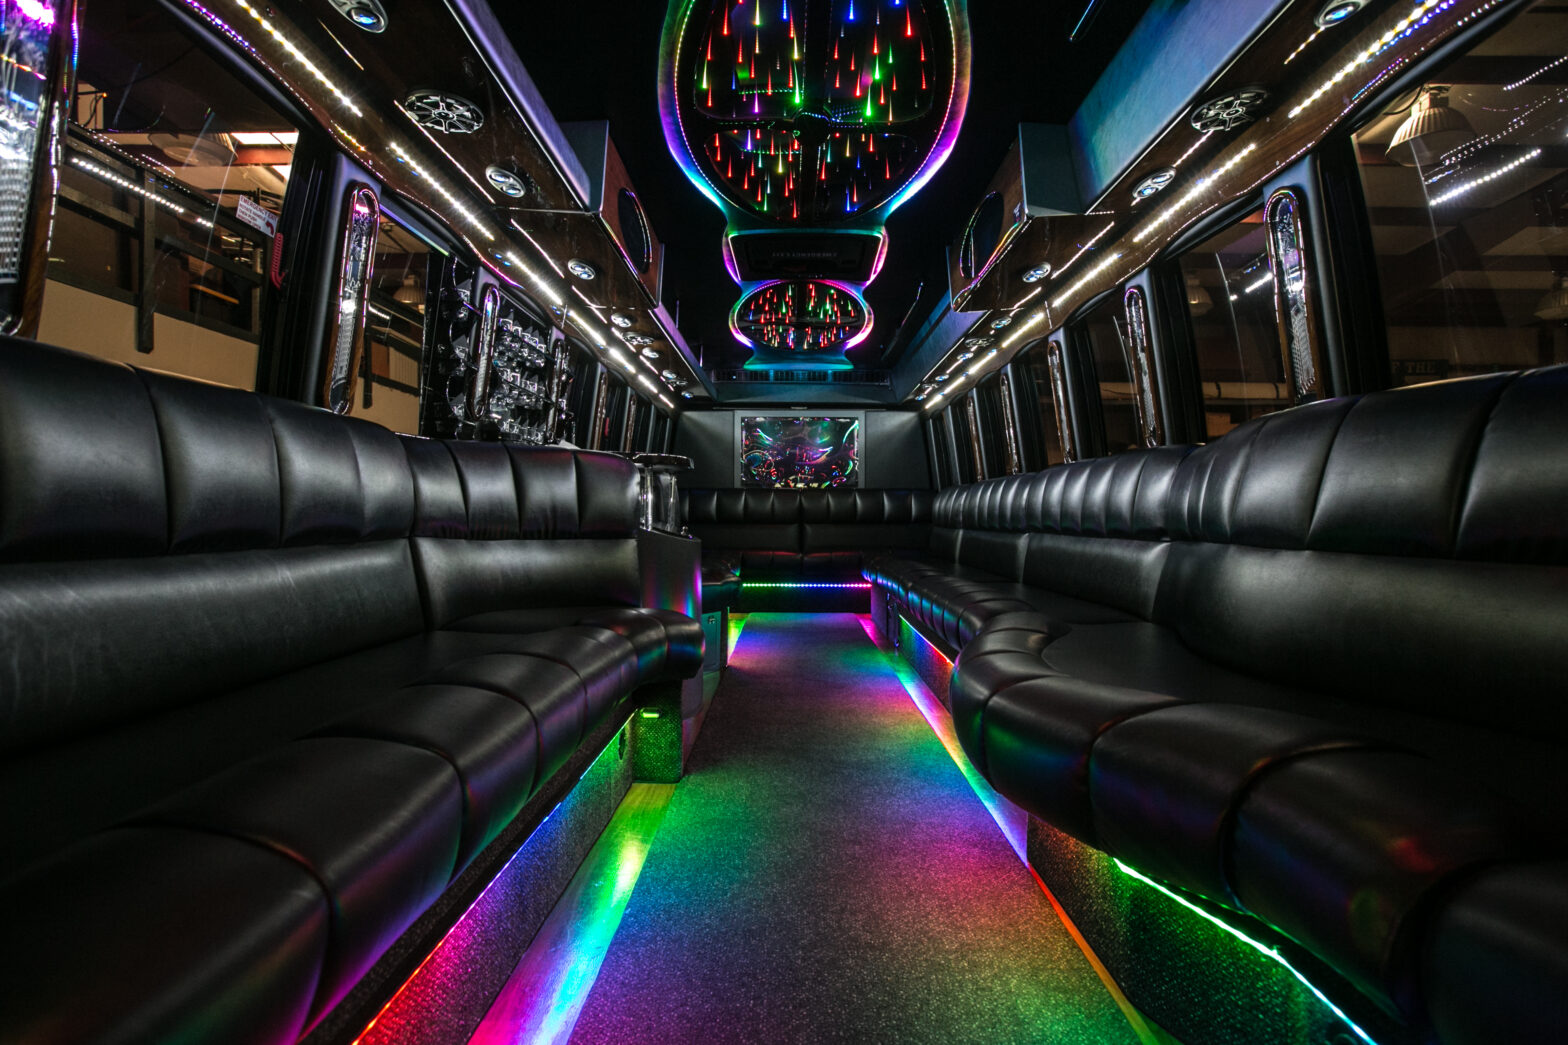 Interior of a party bus.